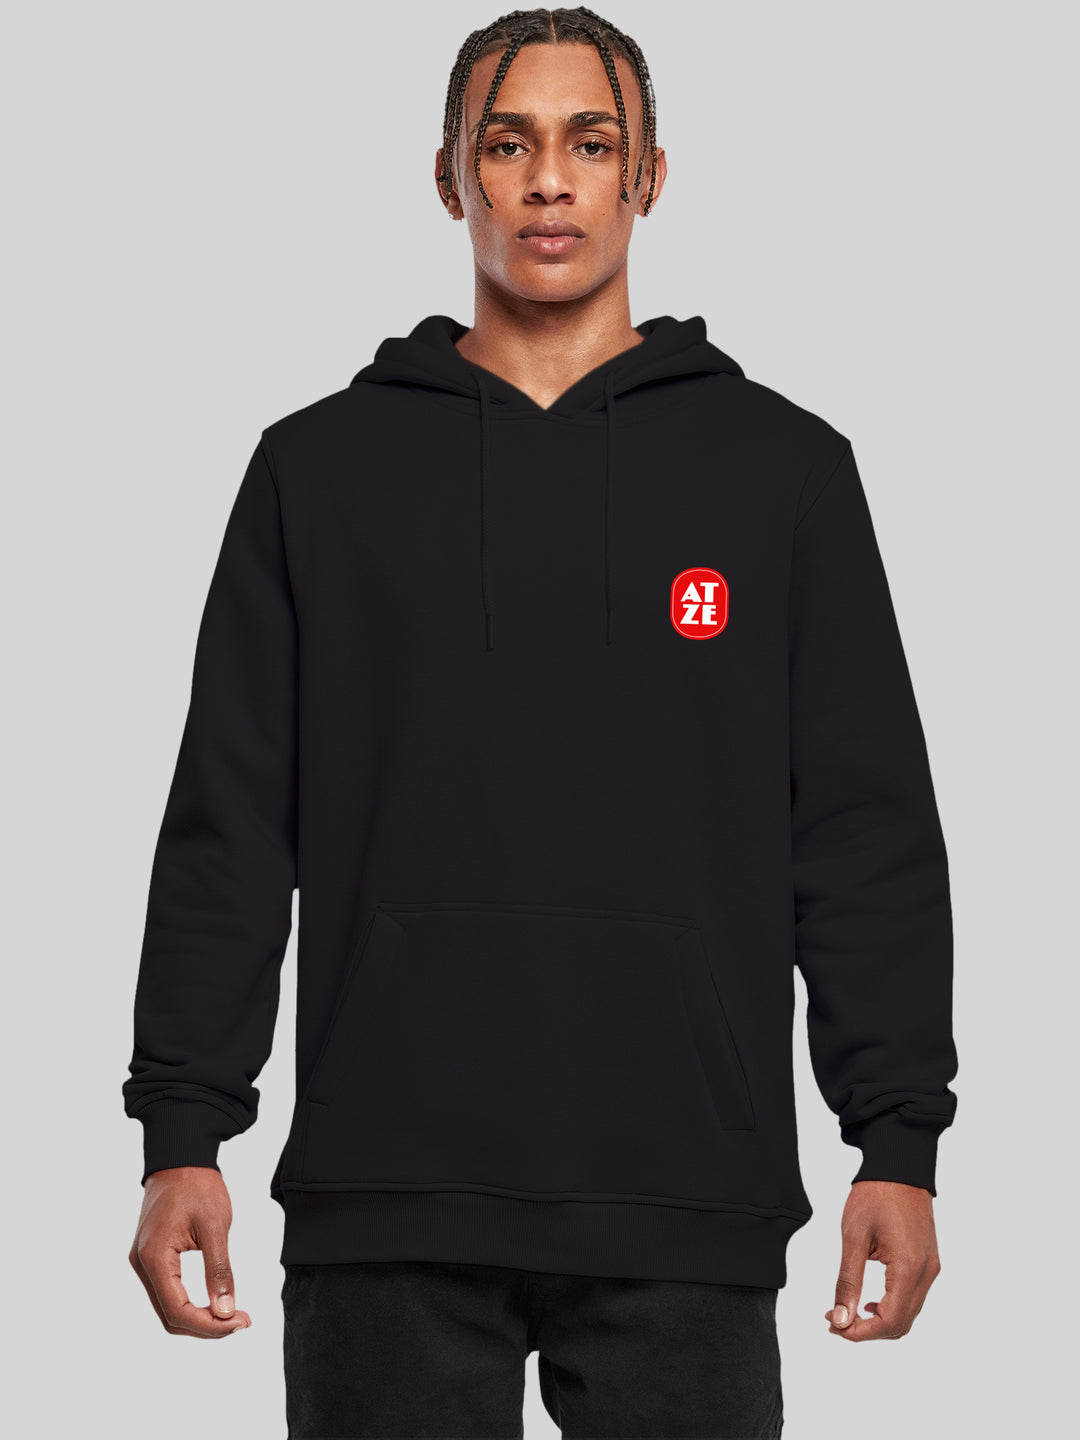 Atze Logo with Fitted heavy hoody